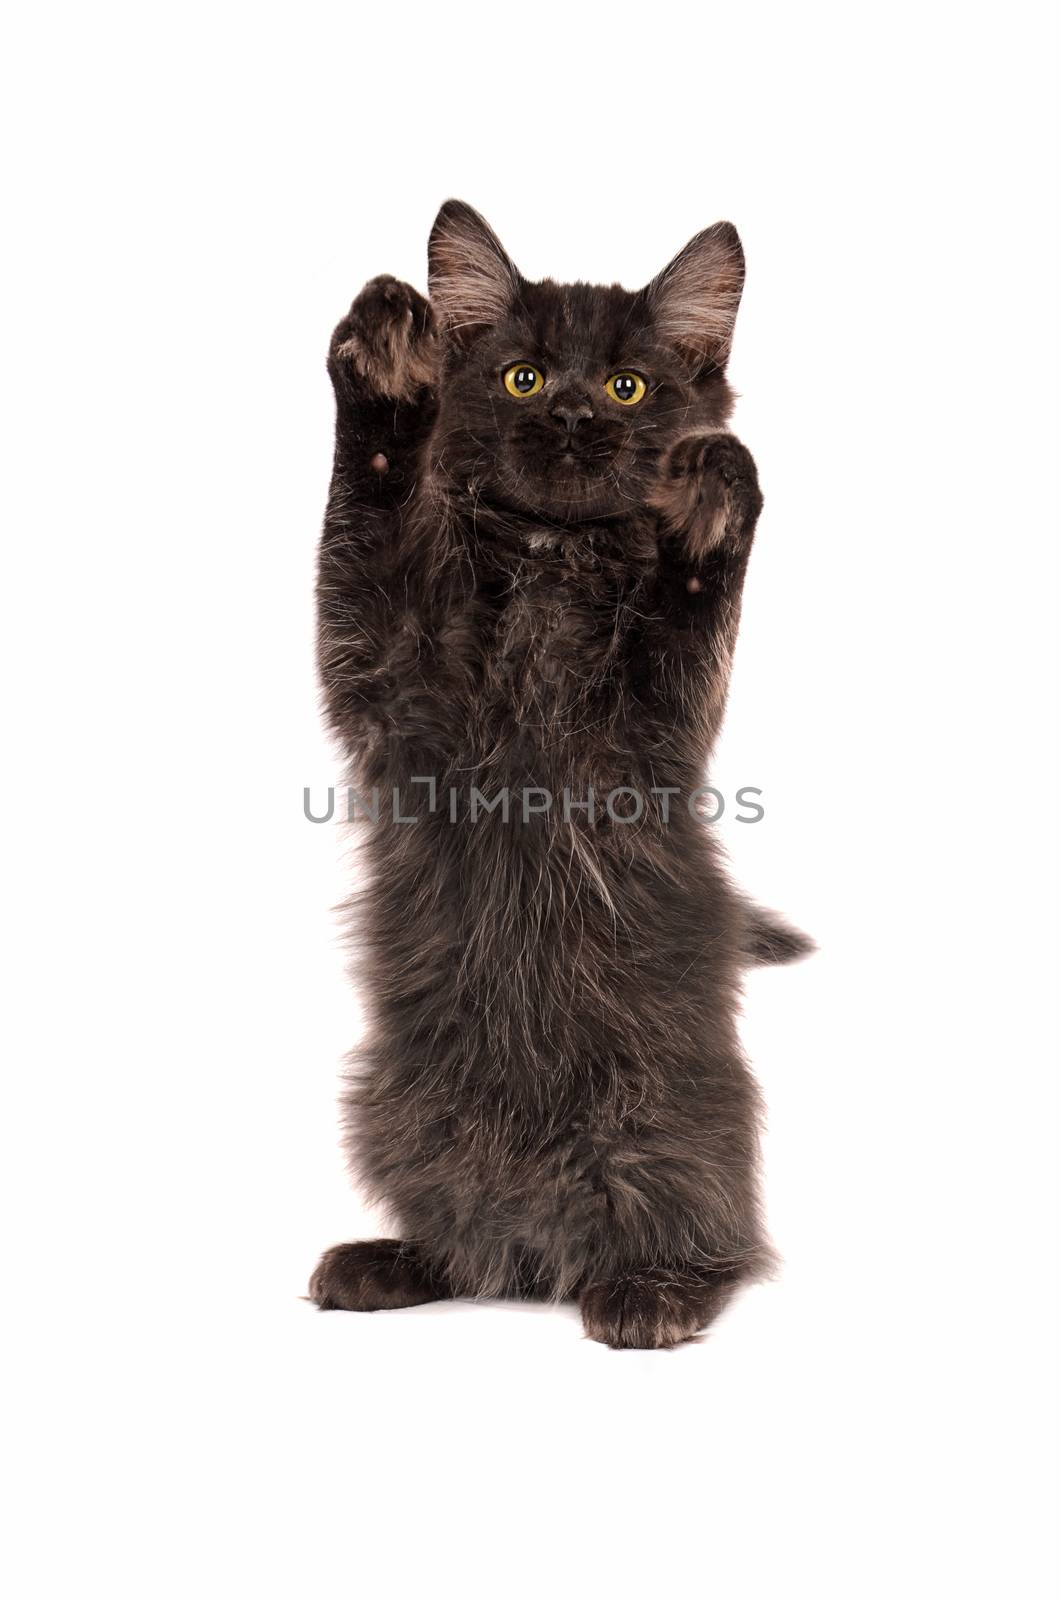 A fluffy black kitten standing on a white background